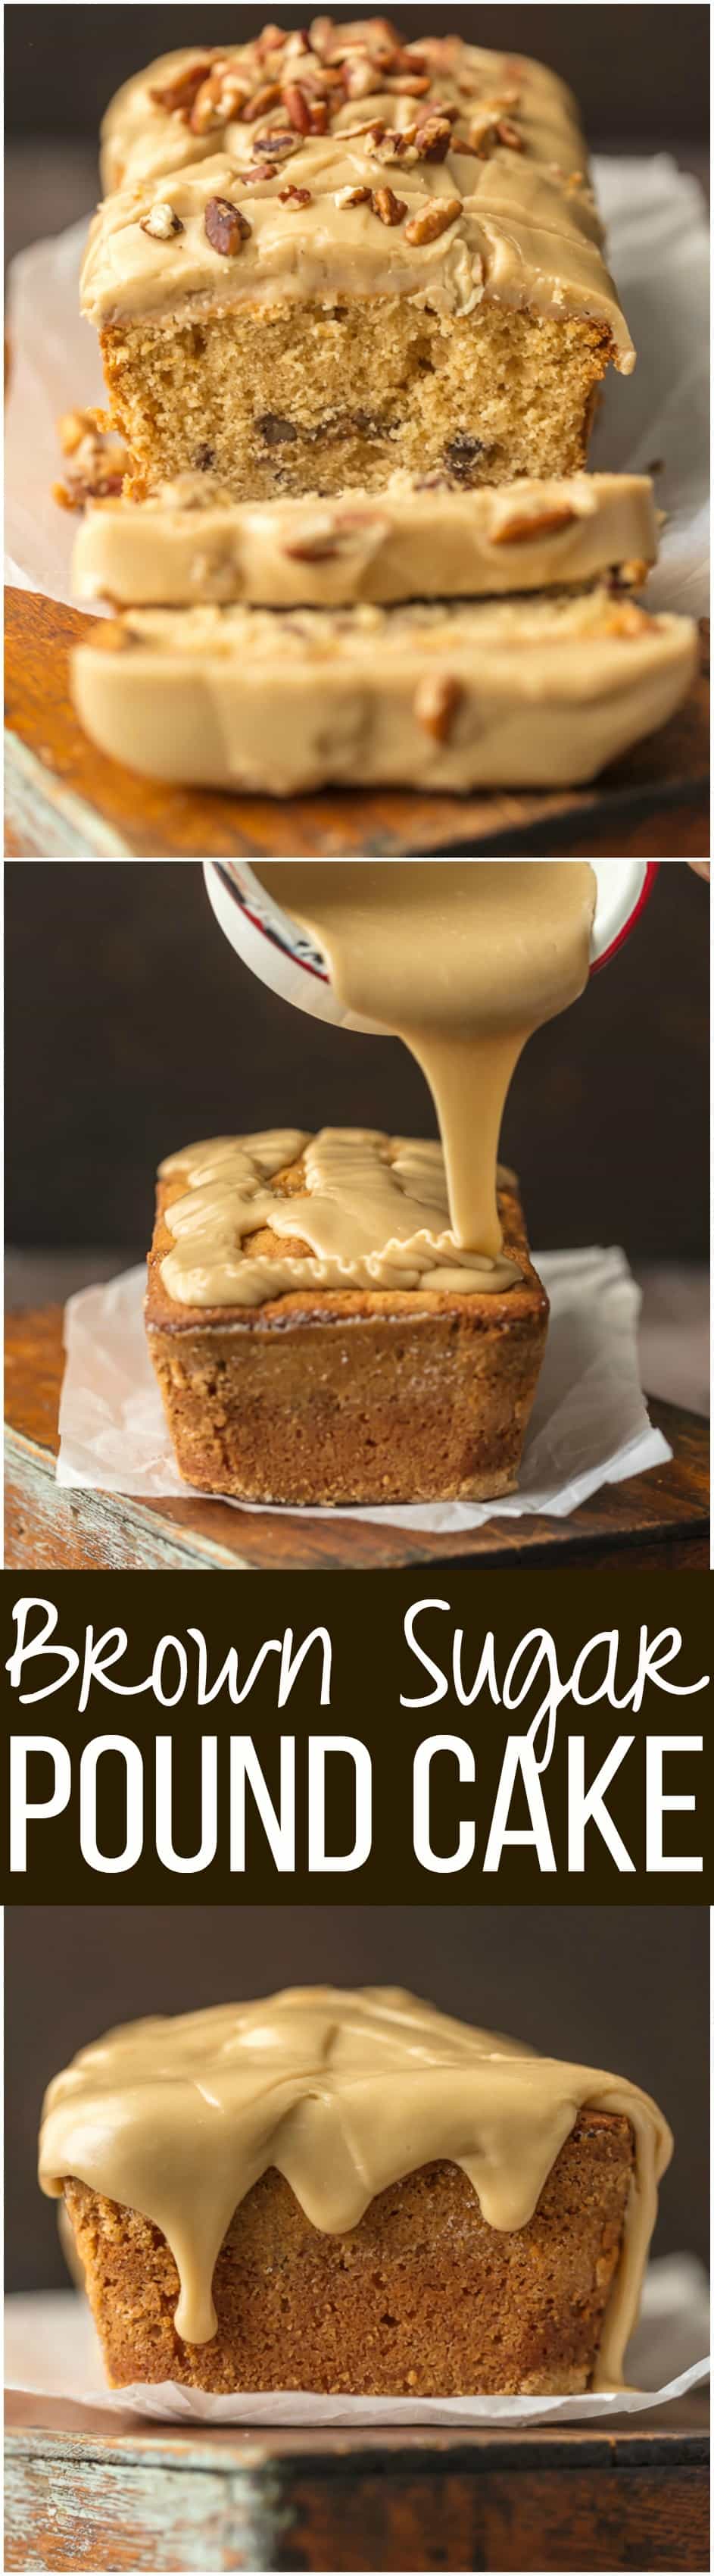 This BROWN SUGAR POUND CAKE with BROWN SUGAR ICING (let's be honest, it's caramel) is utterly delicious and just perfect for Fall. A simple classic. The pecans add a little extra crunch to this sweet and amazing cake.